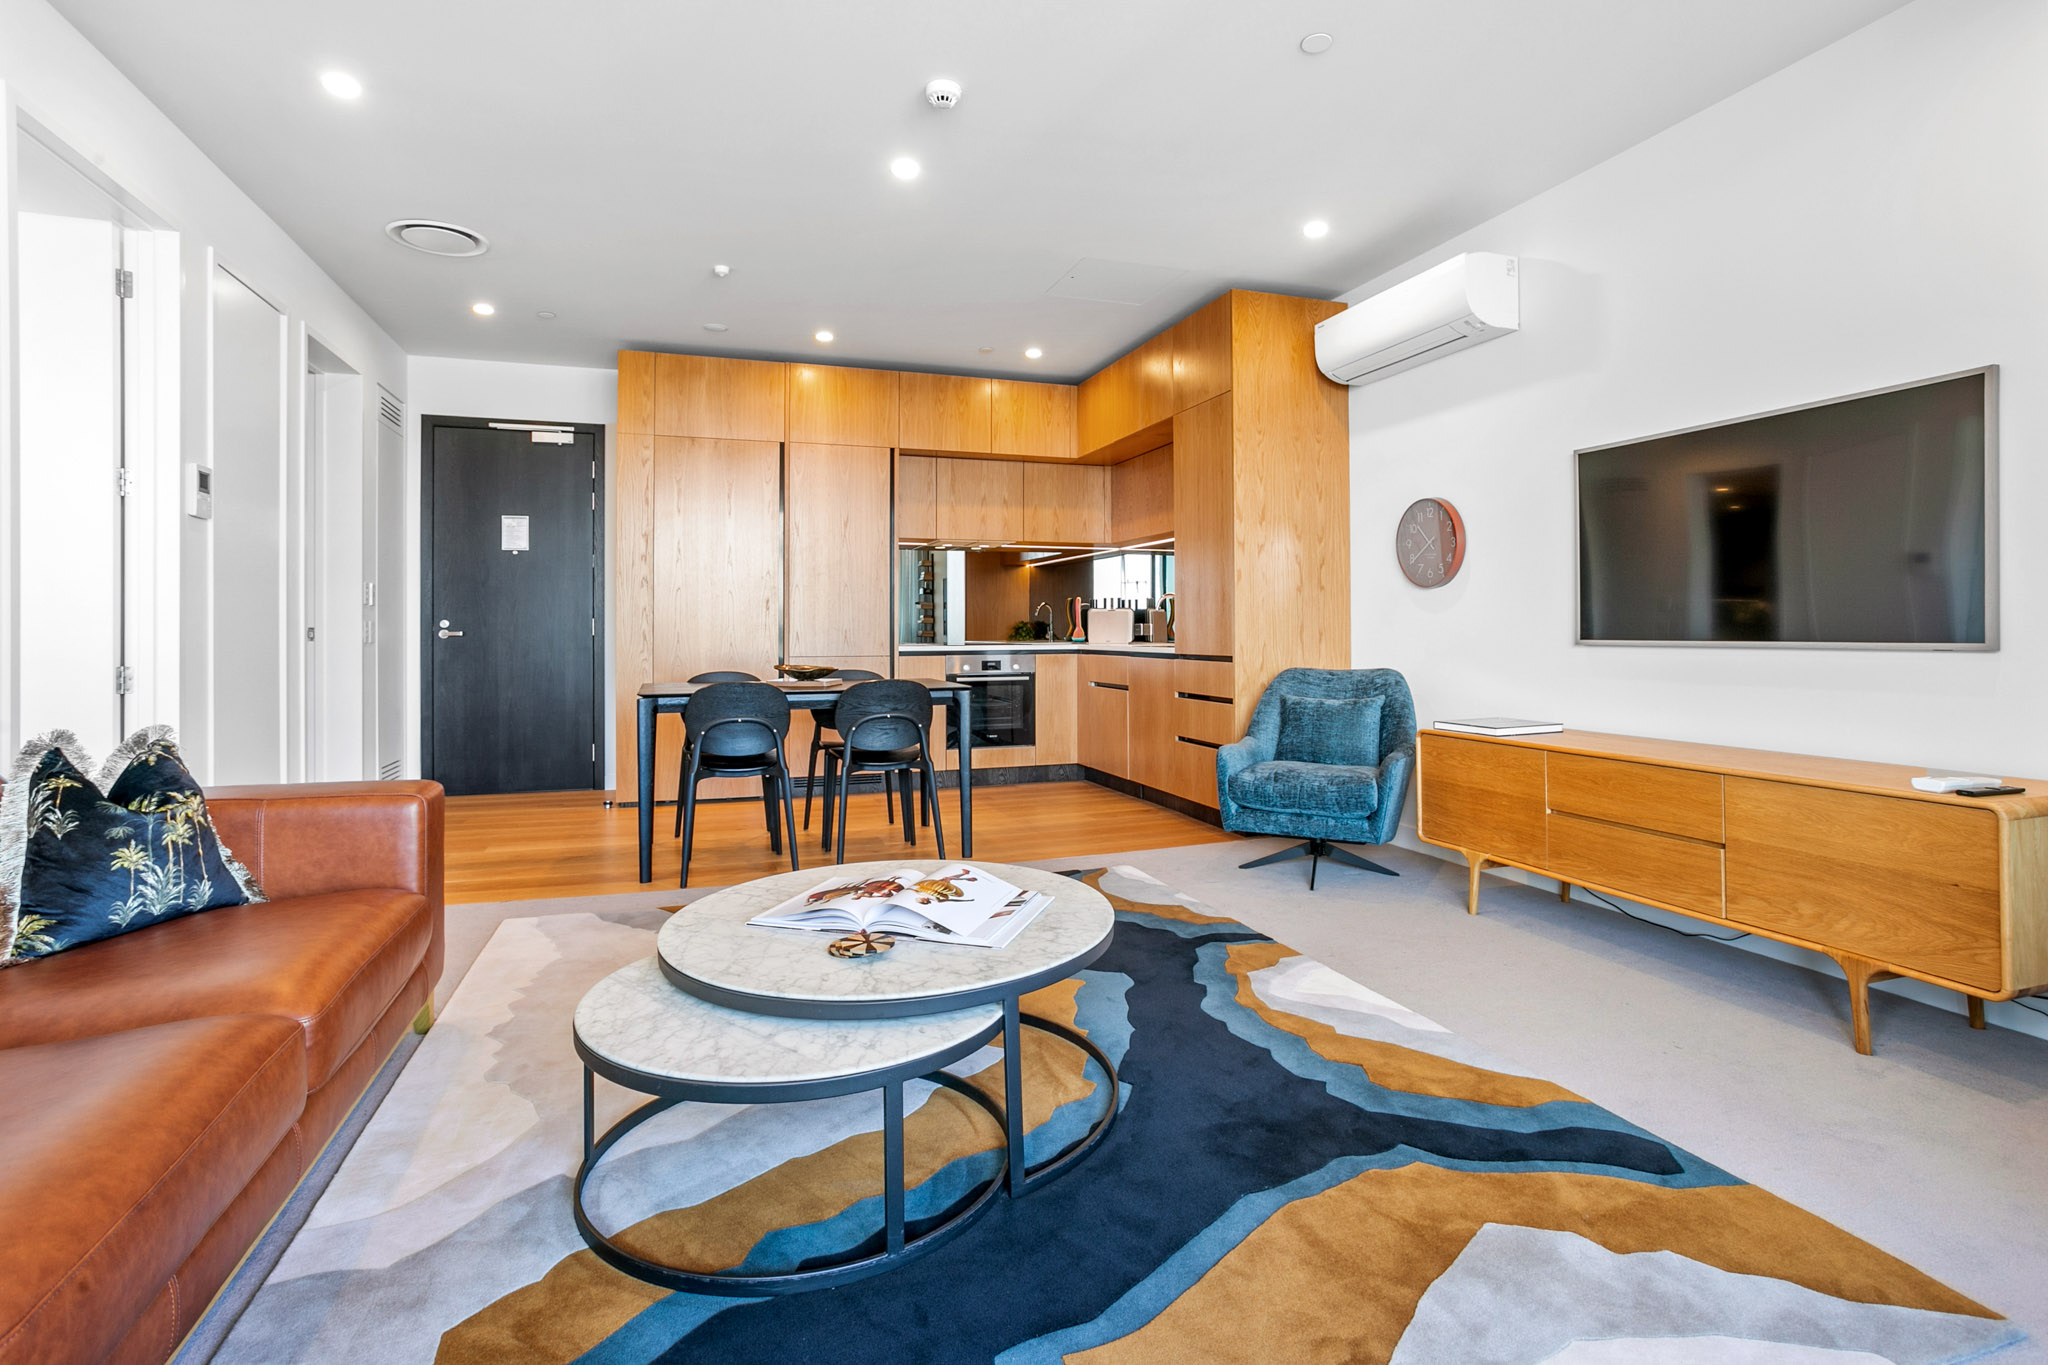 Living Room - Wynyard Quarter Apartments by Urban Rest - Auckland, New Zealand